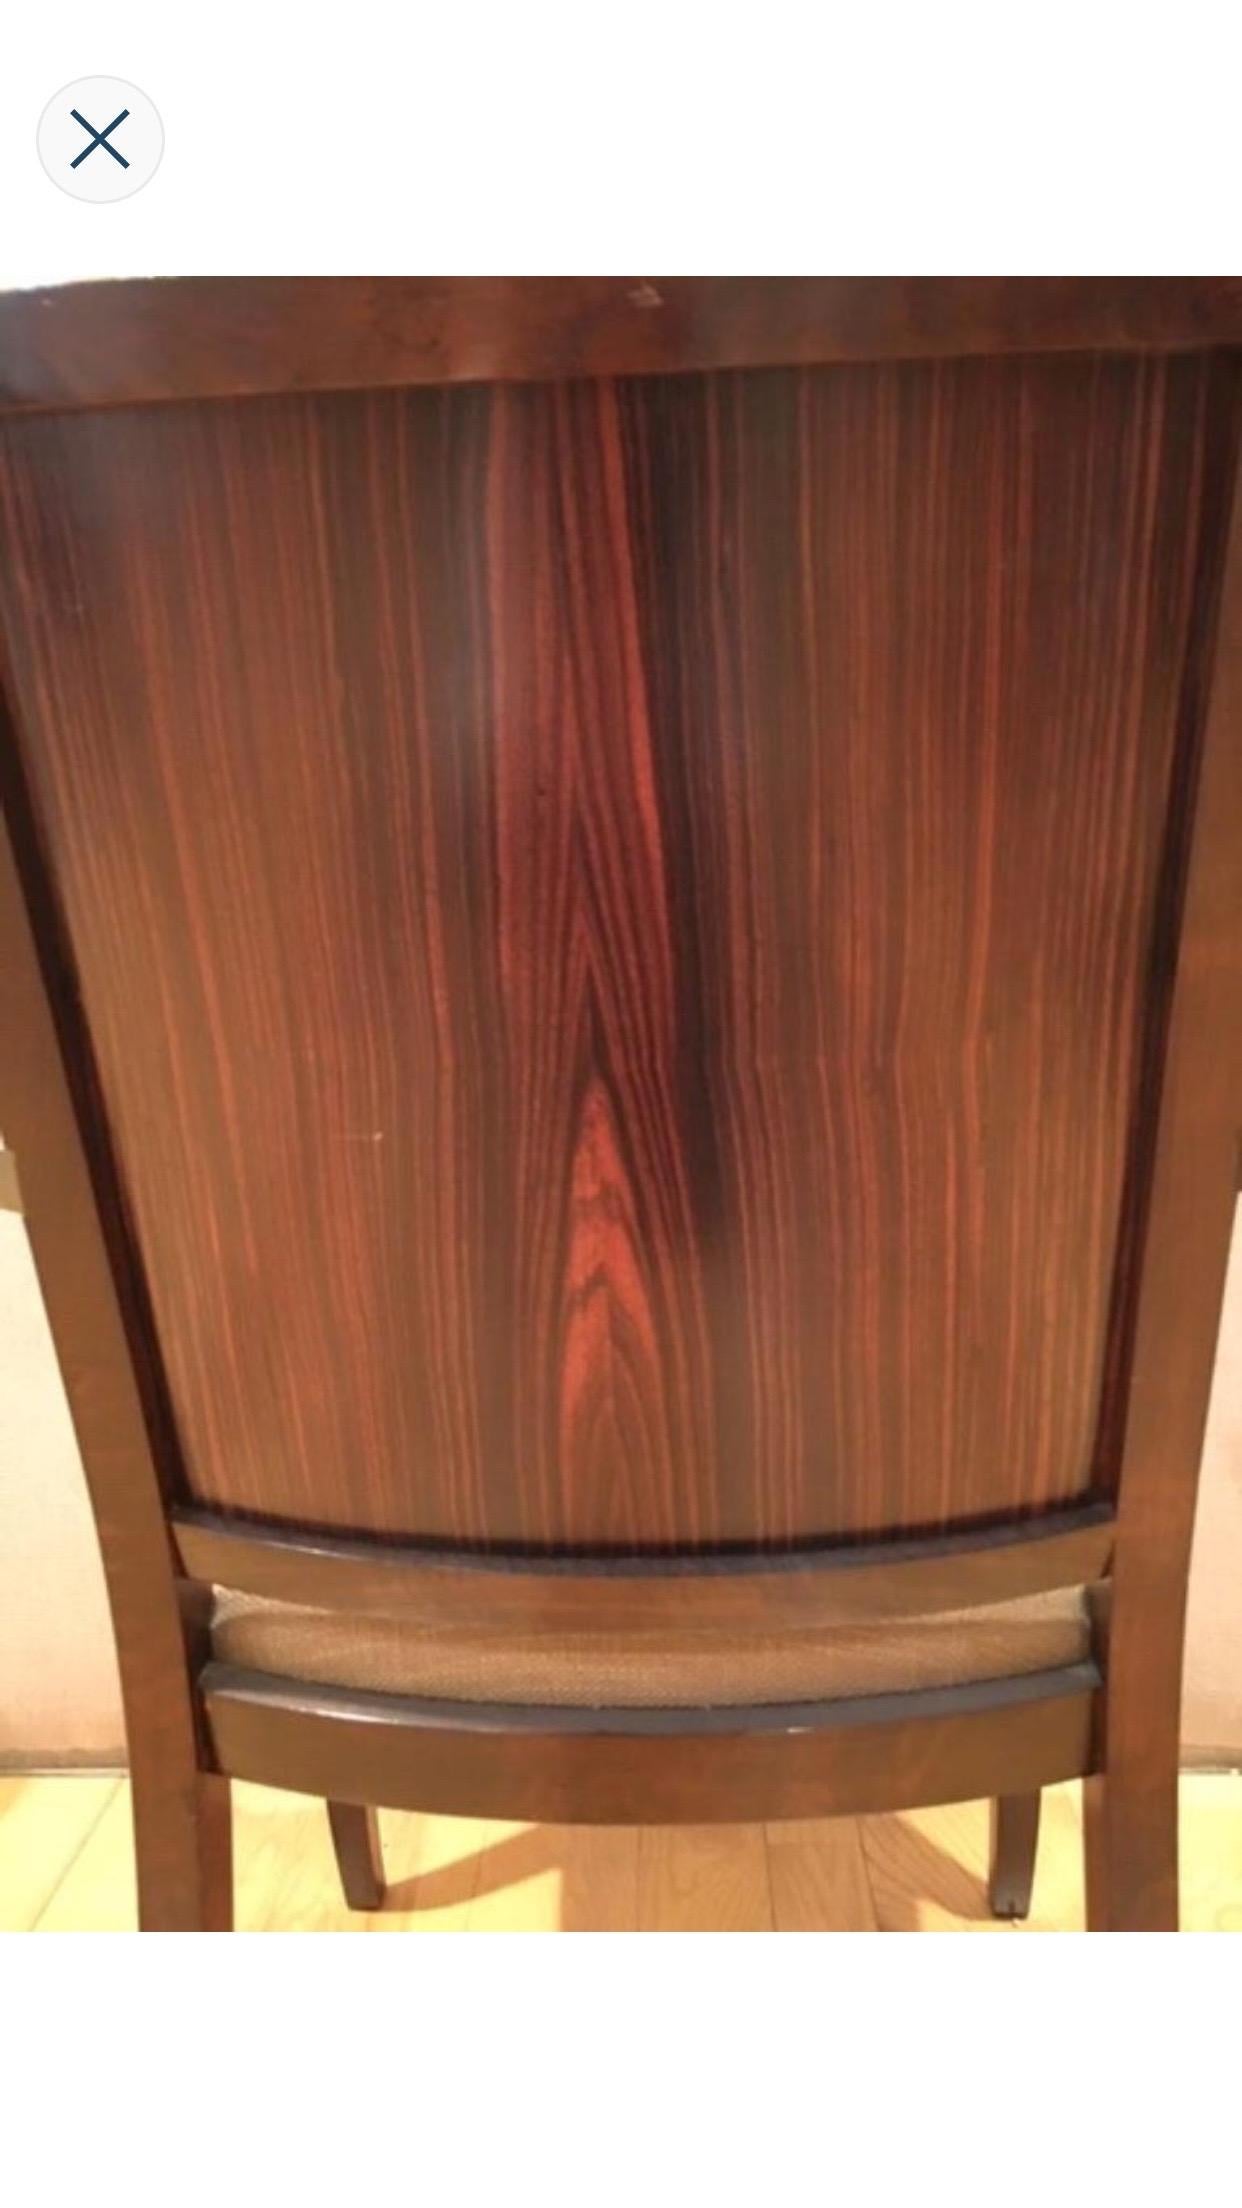 Contemporary Macassar Ebony and Walnut Dining Chairs For Sale